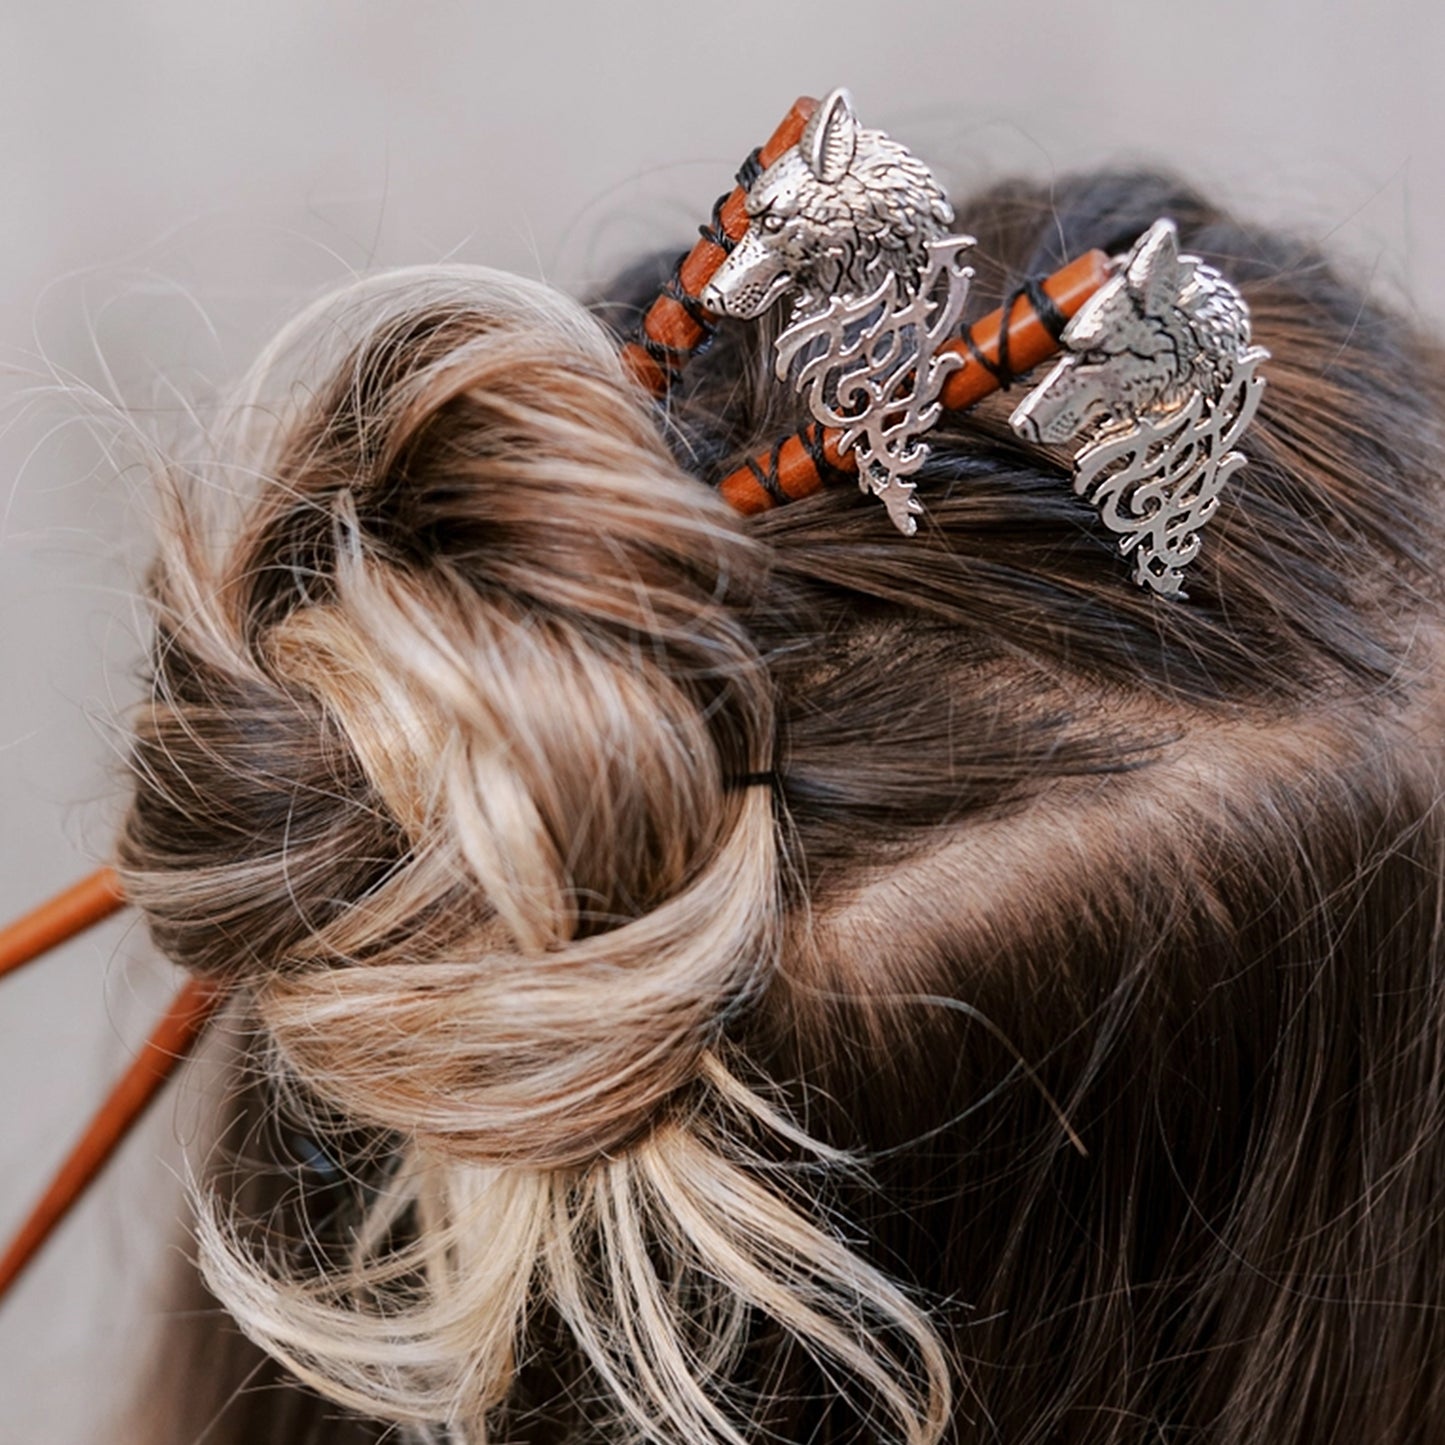 Top view of a long-haired model's head. Two wooden sticks are inserted through her hair, with silver wolfhead pendants at the end of each.